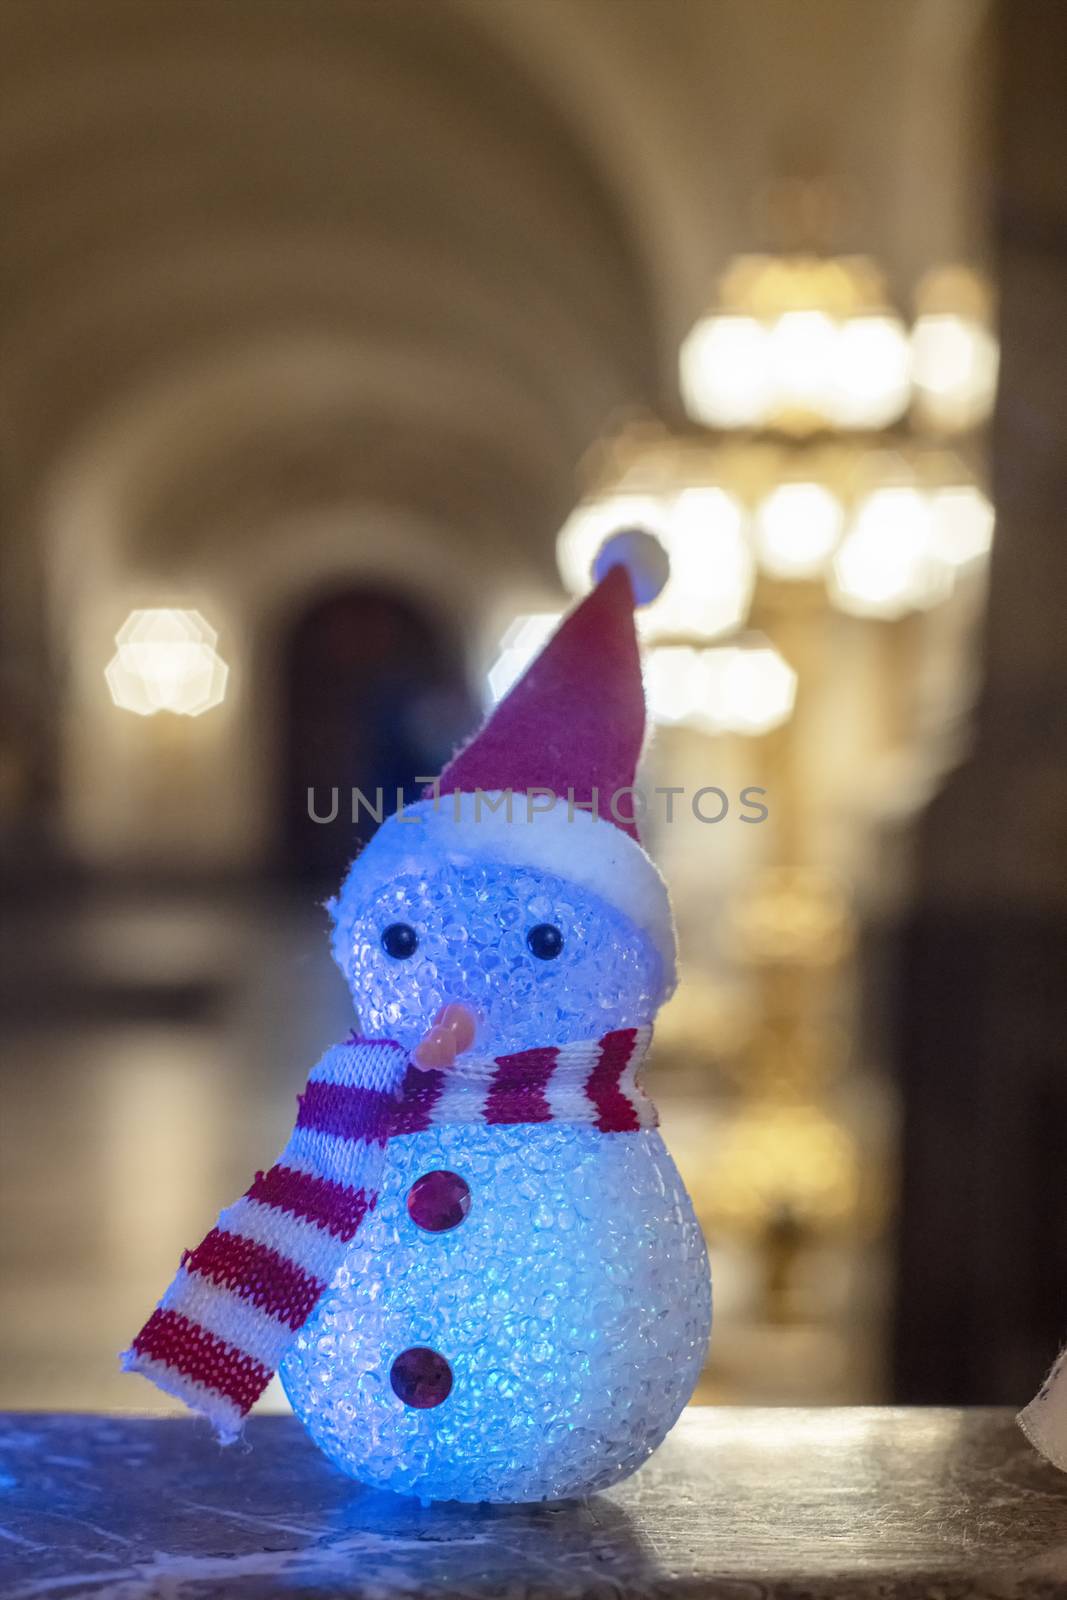 Little snowman wearing a rainbow scarf and hat against a golden light bokeh waiting for Christmas time and gifts